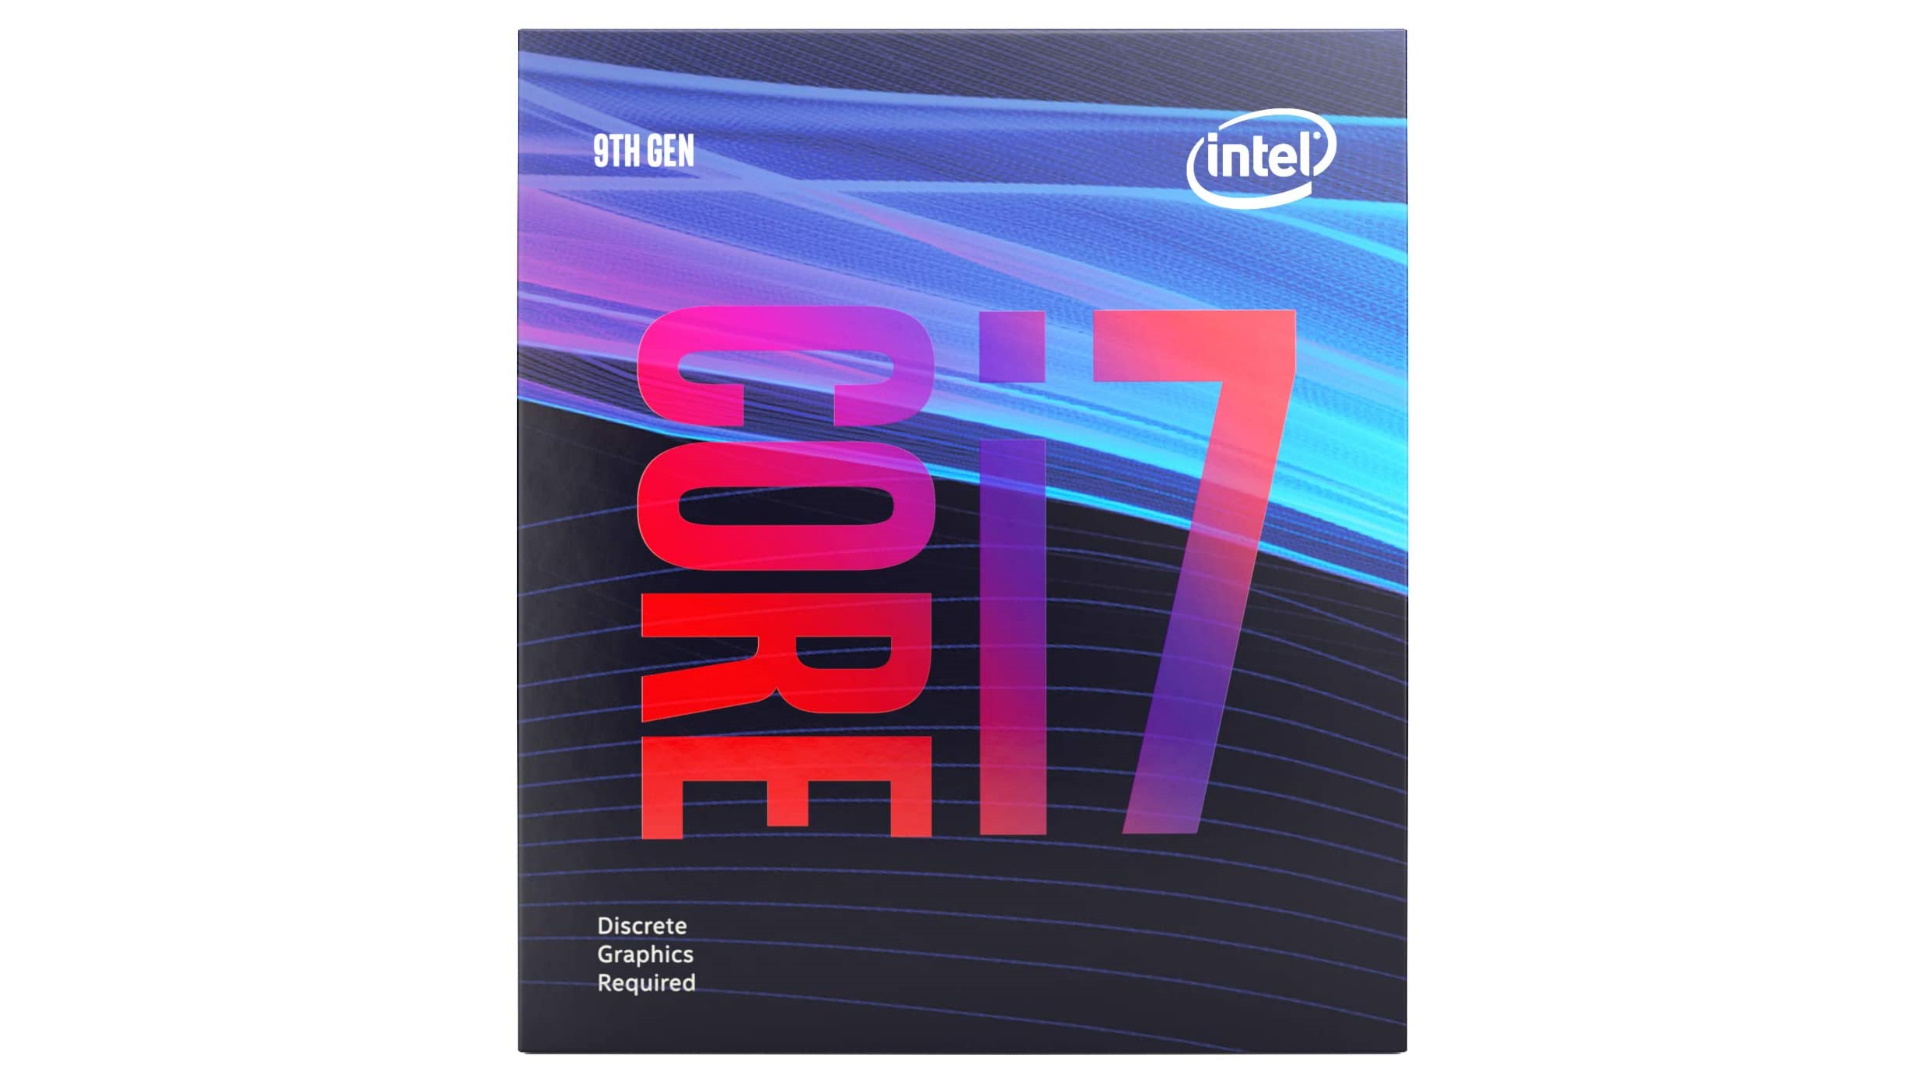 The Intel Core i7 9700F is now only $300 on Amazon (US only